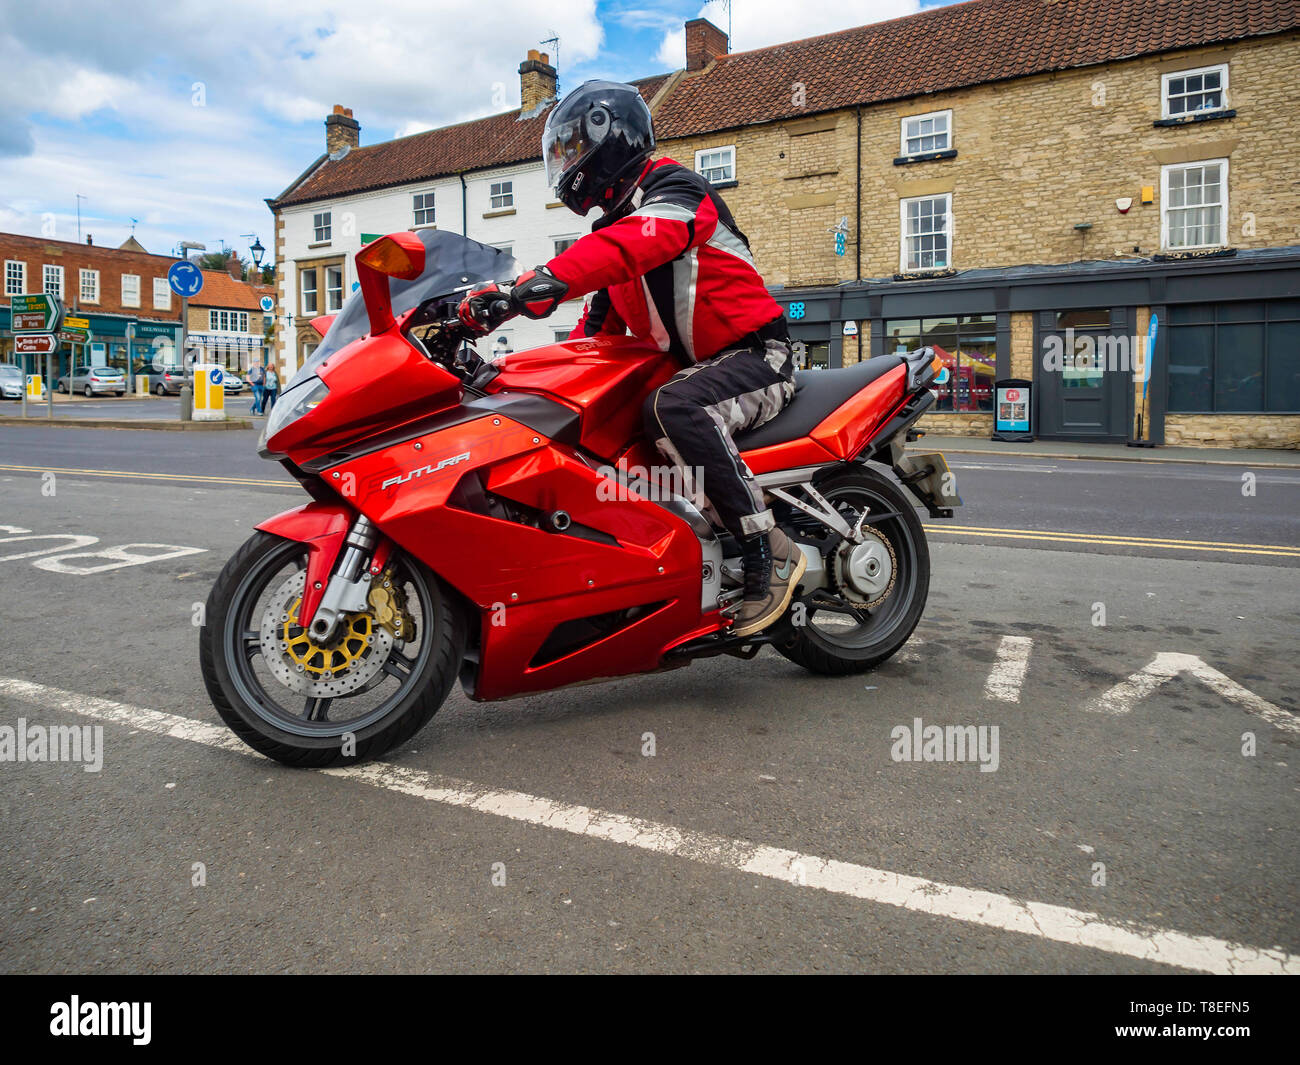 A motor cyclist riding a red Aprilia Futura Motor cycle pulling up at a Favorite stopping place in Helmsley Market North Yorkshire Stock Photo